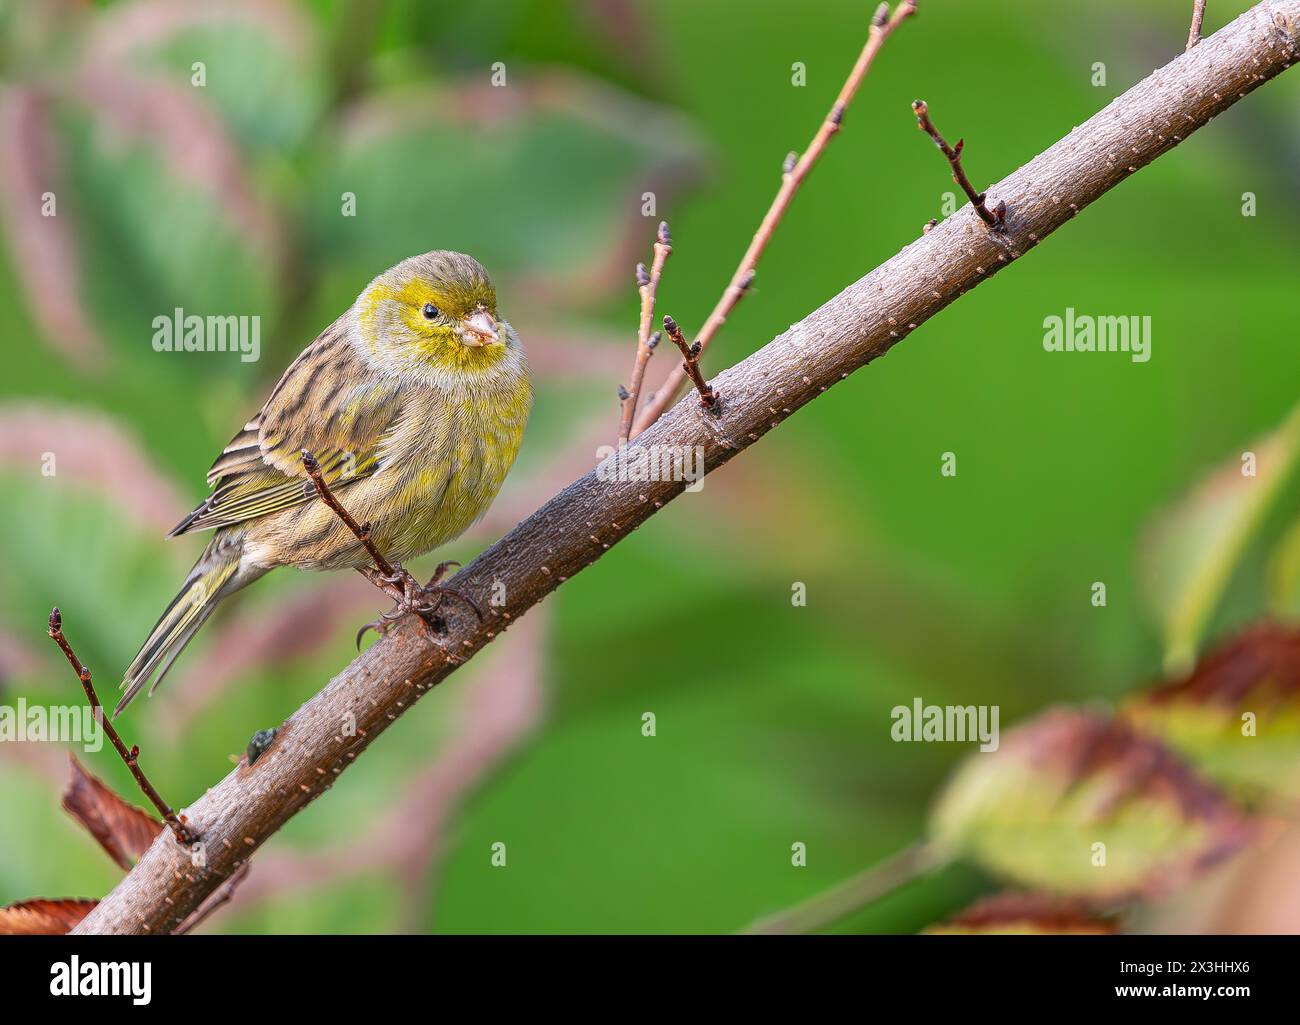 Atlantic canary, (Serinus canaria), on a branch, in Tenerife, Canary islands Stock Photo